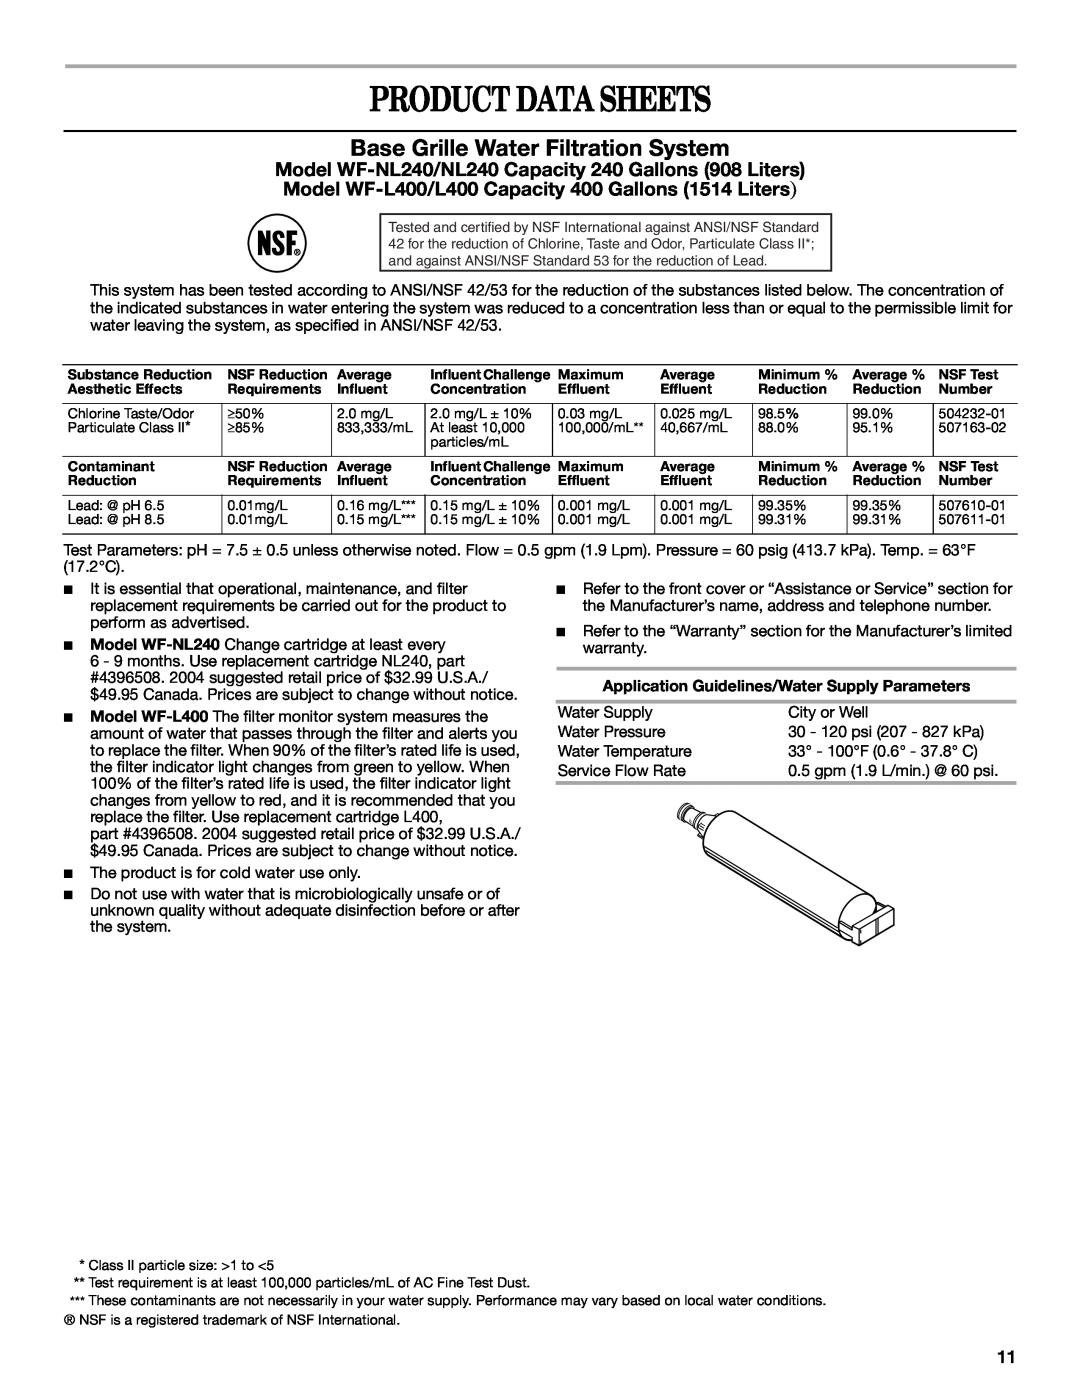 Whirlpool GS5SHAXNT warranty Product Data Sheets, Base Grille Water Filtration System 